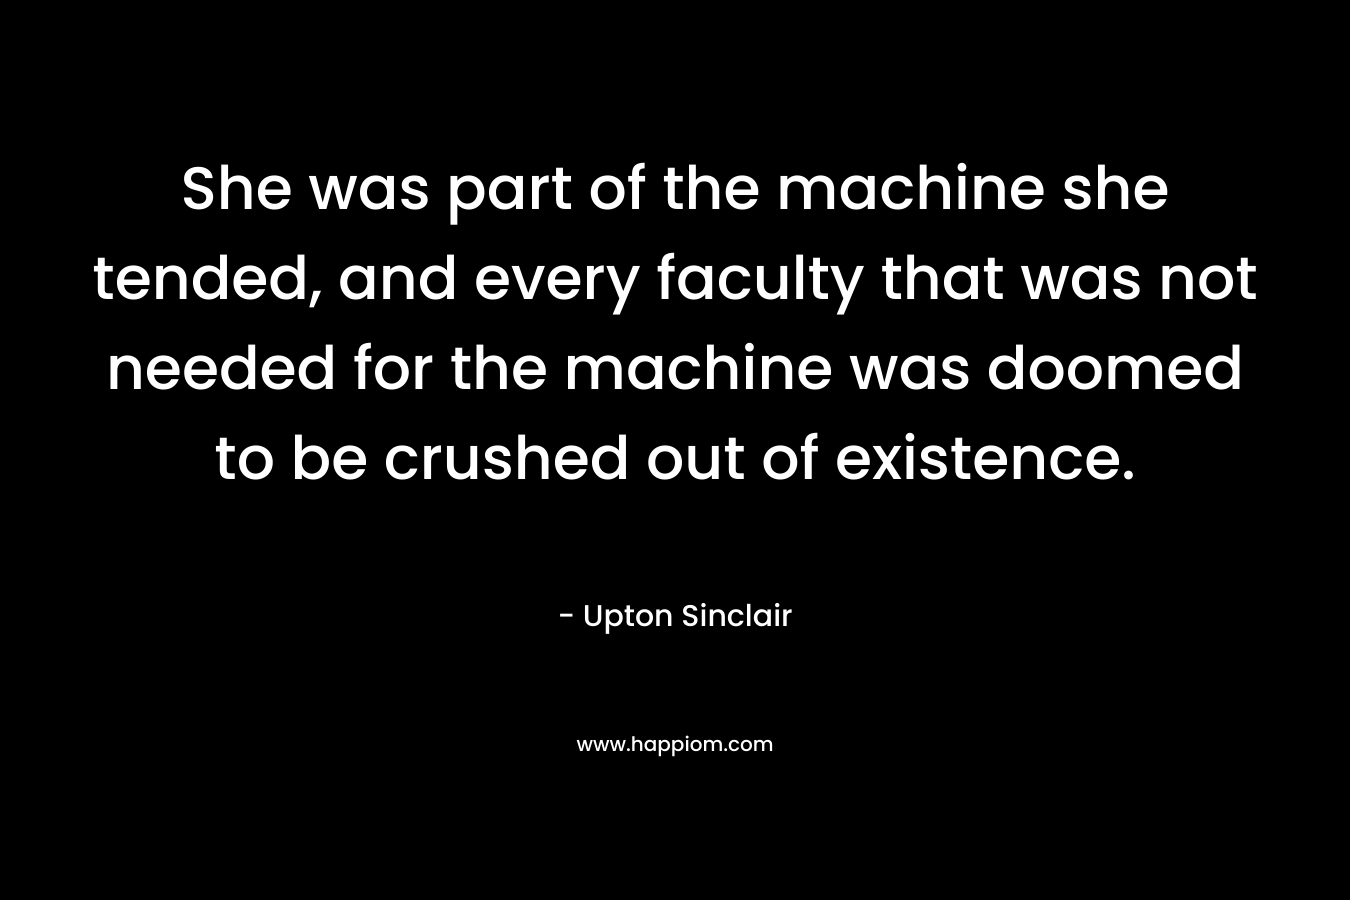 She was part of the machine she tended, and every faculty that was not needed for the machine was doomed to be crushed out of existence.